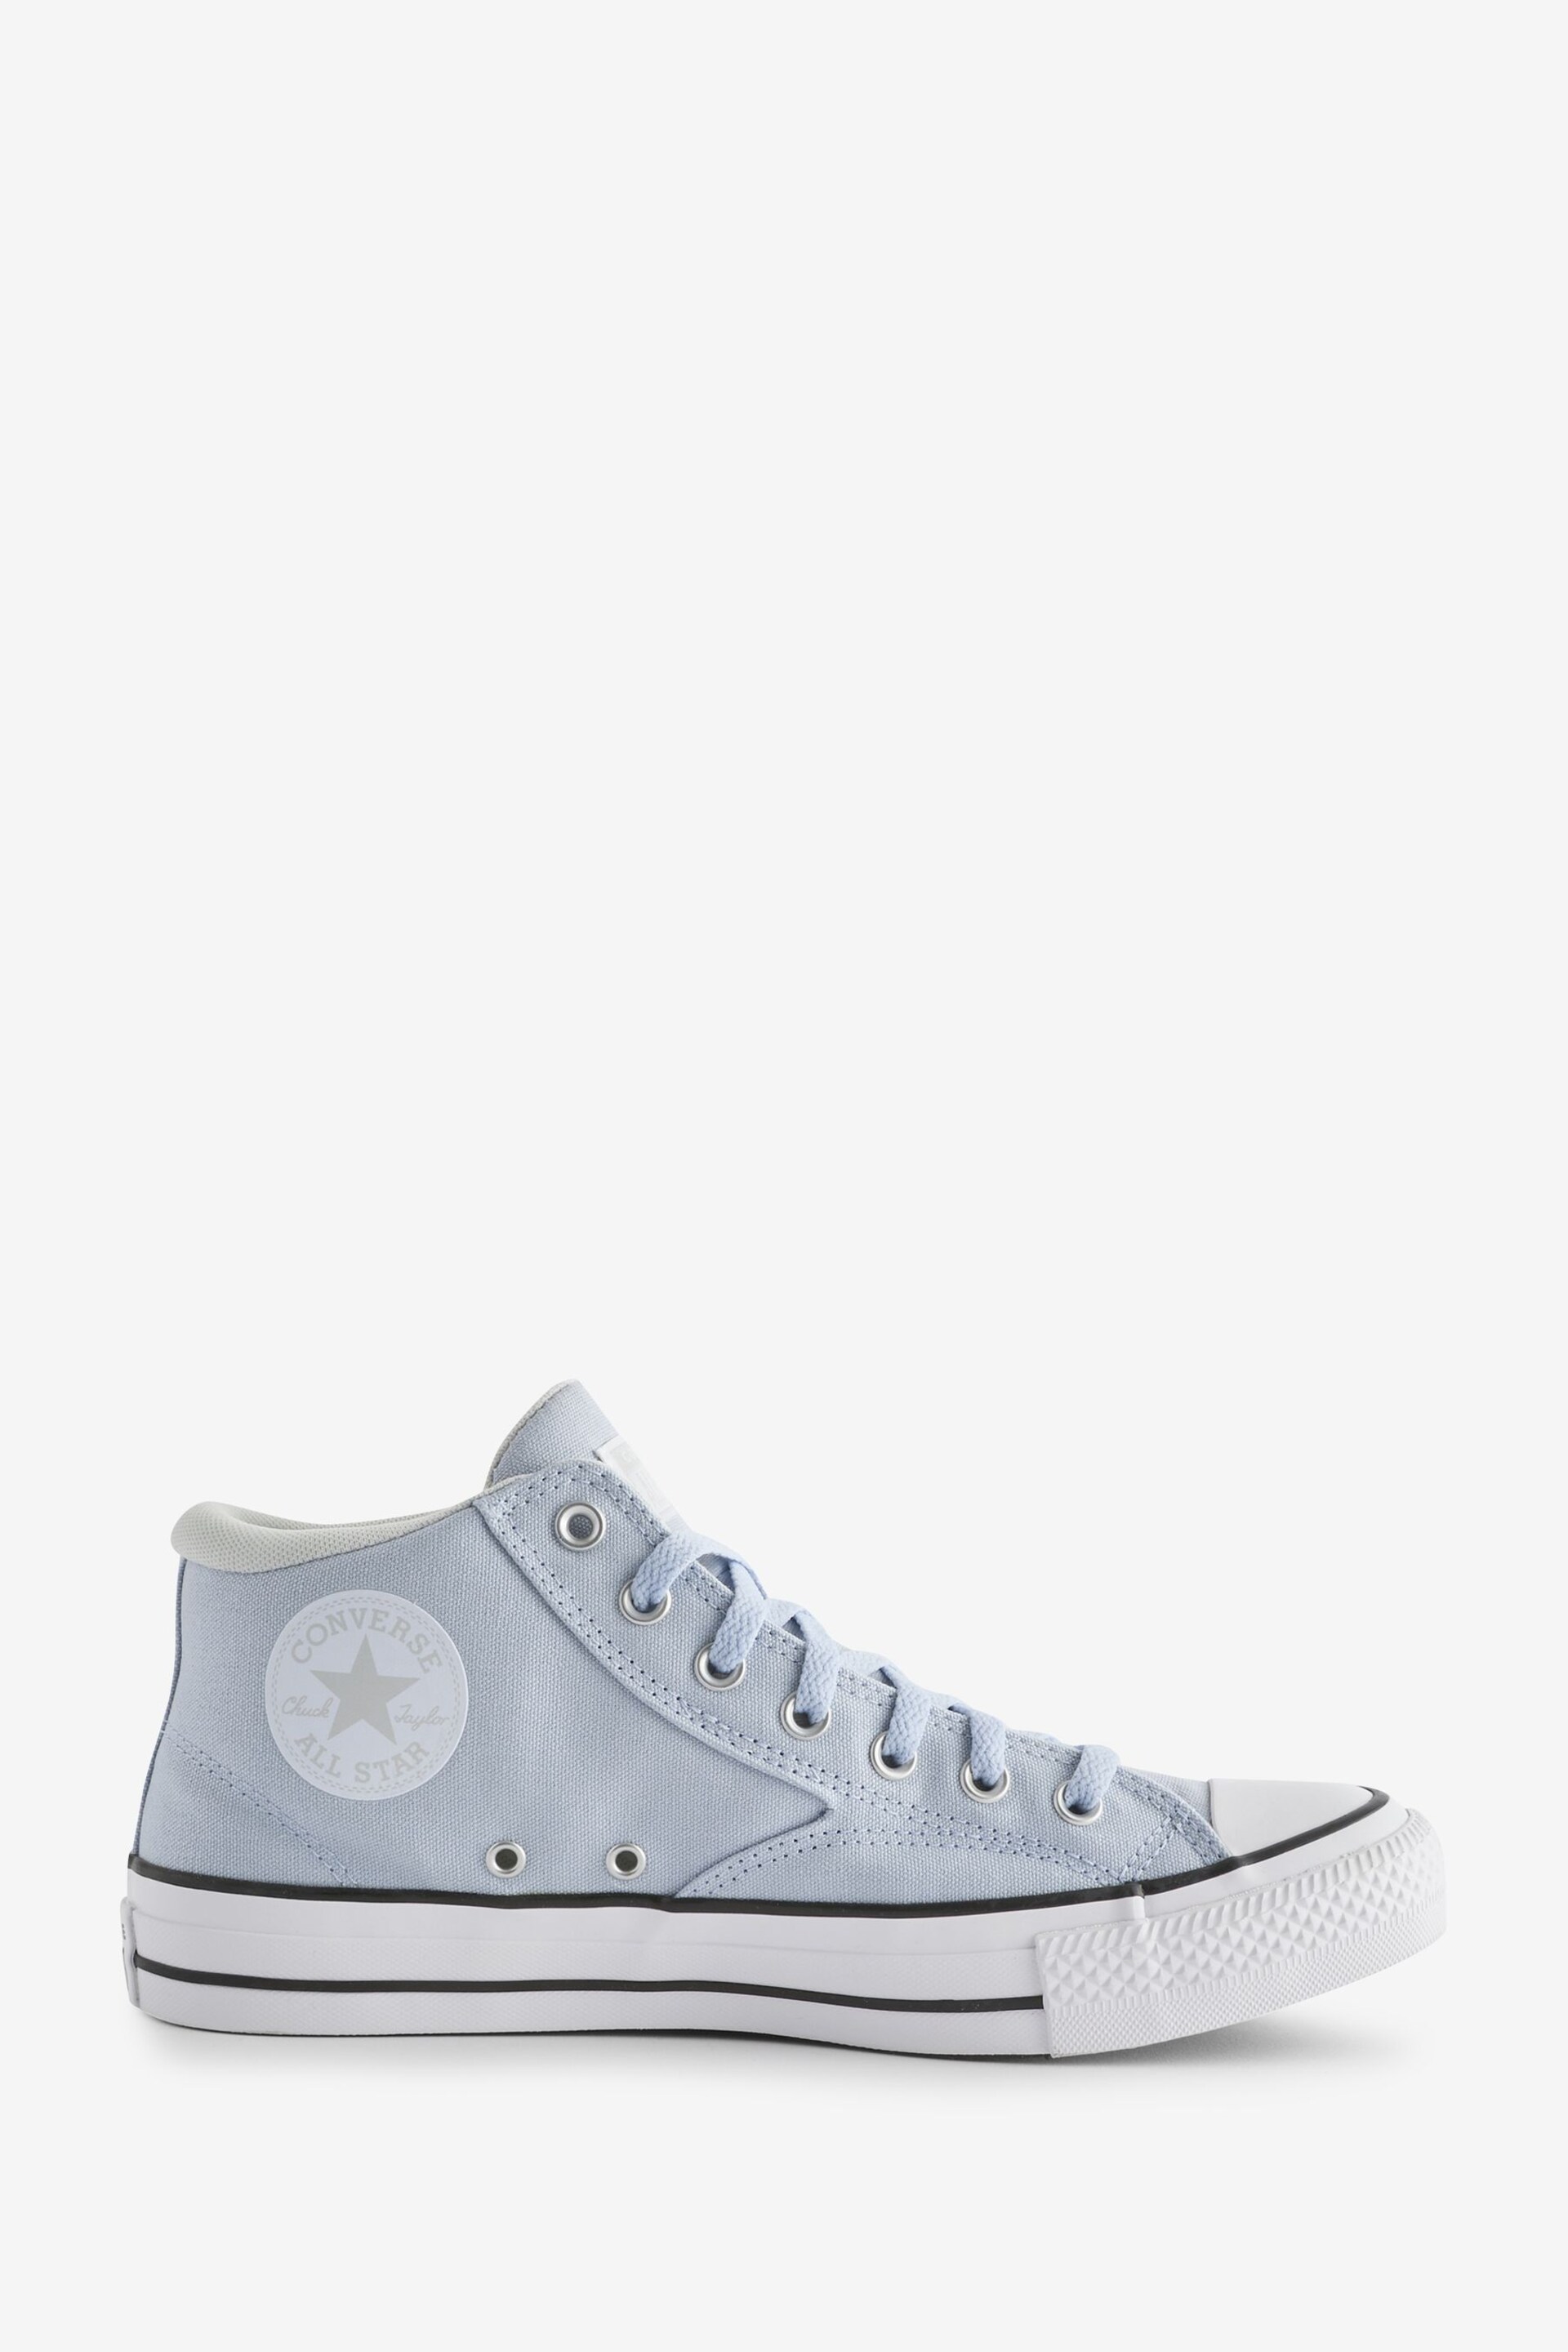 Converse Blue Chuck Taylor All Star Malden Street Trainers - Image 1 of 15